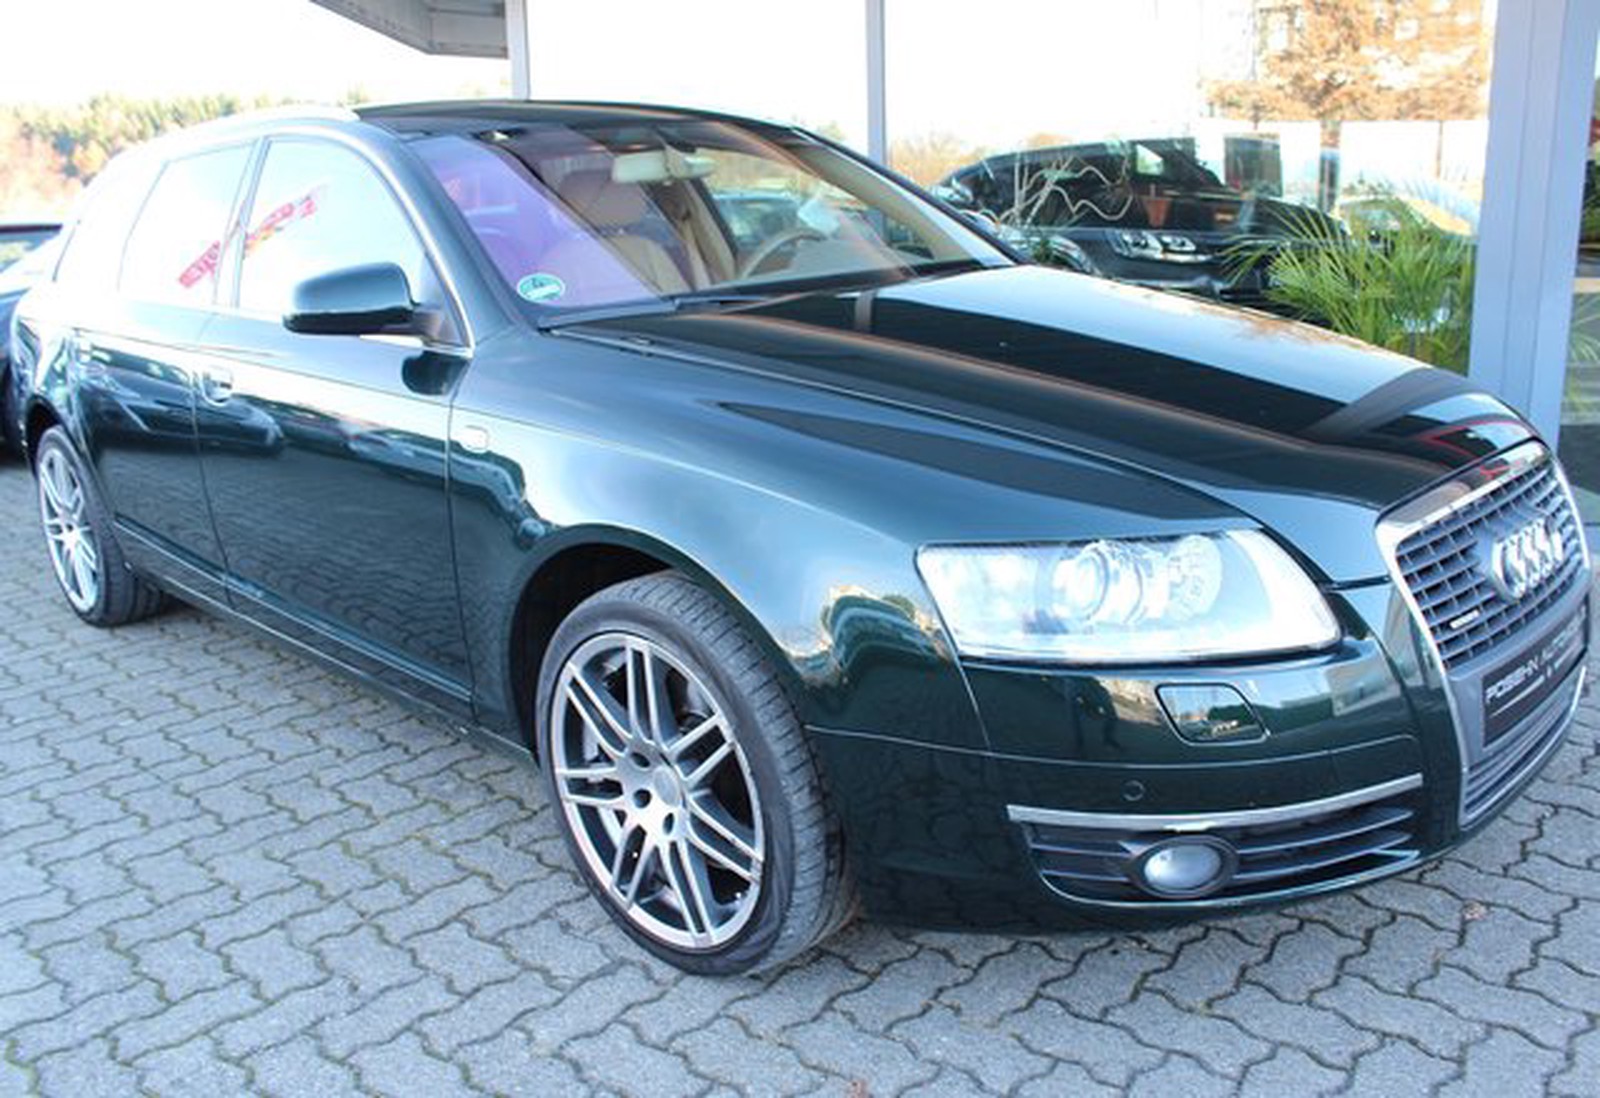 Audi A6 Avant 3 0 Tdi Quattro Air Tiptronic Xenon Leder Navi Used Buy In Hechingen Bechtoldsweiler Price Eur Int Nr 767 Sold